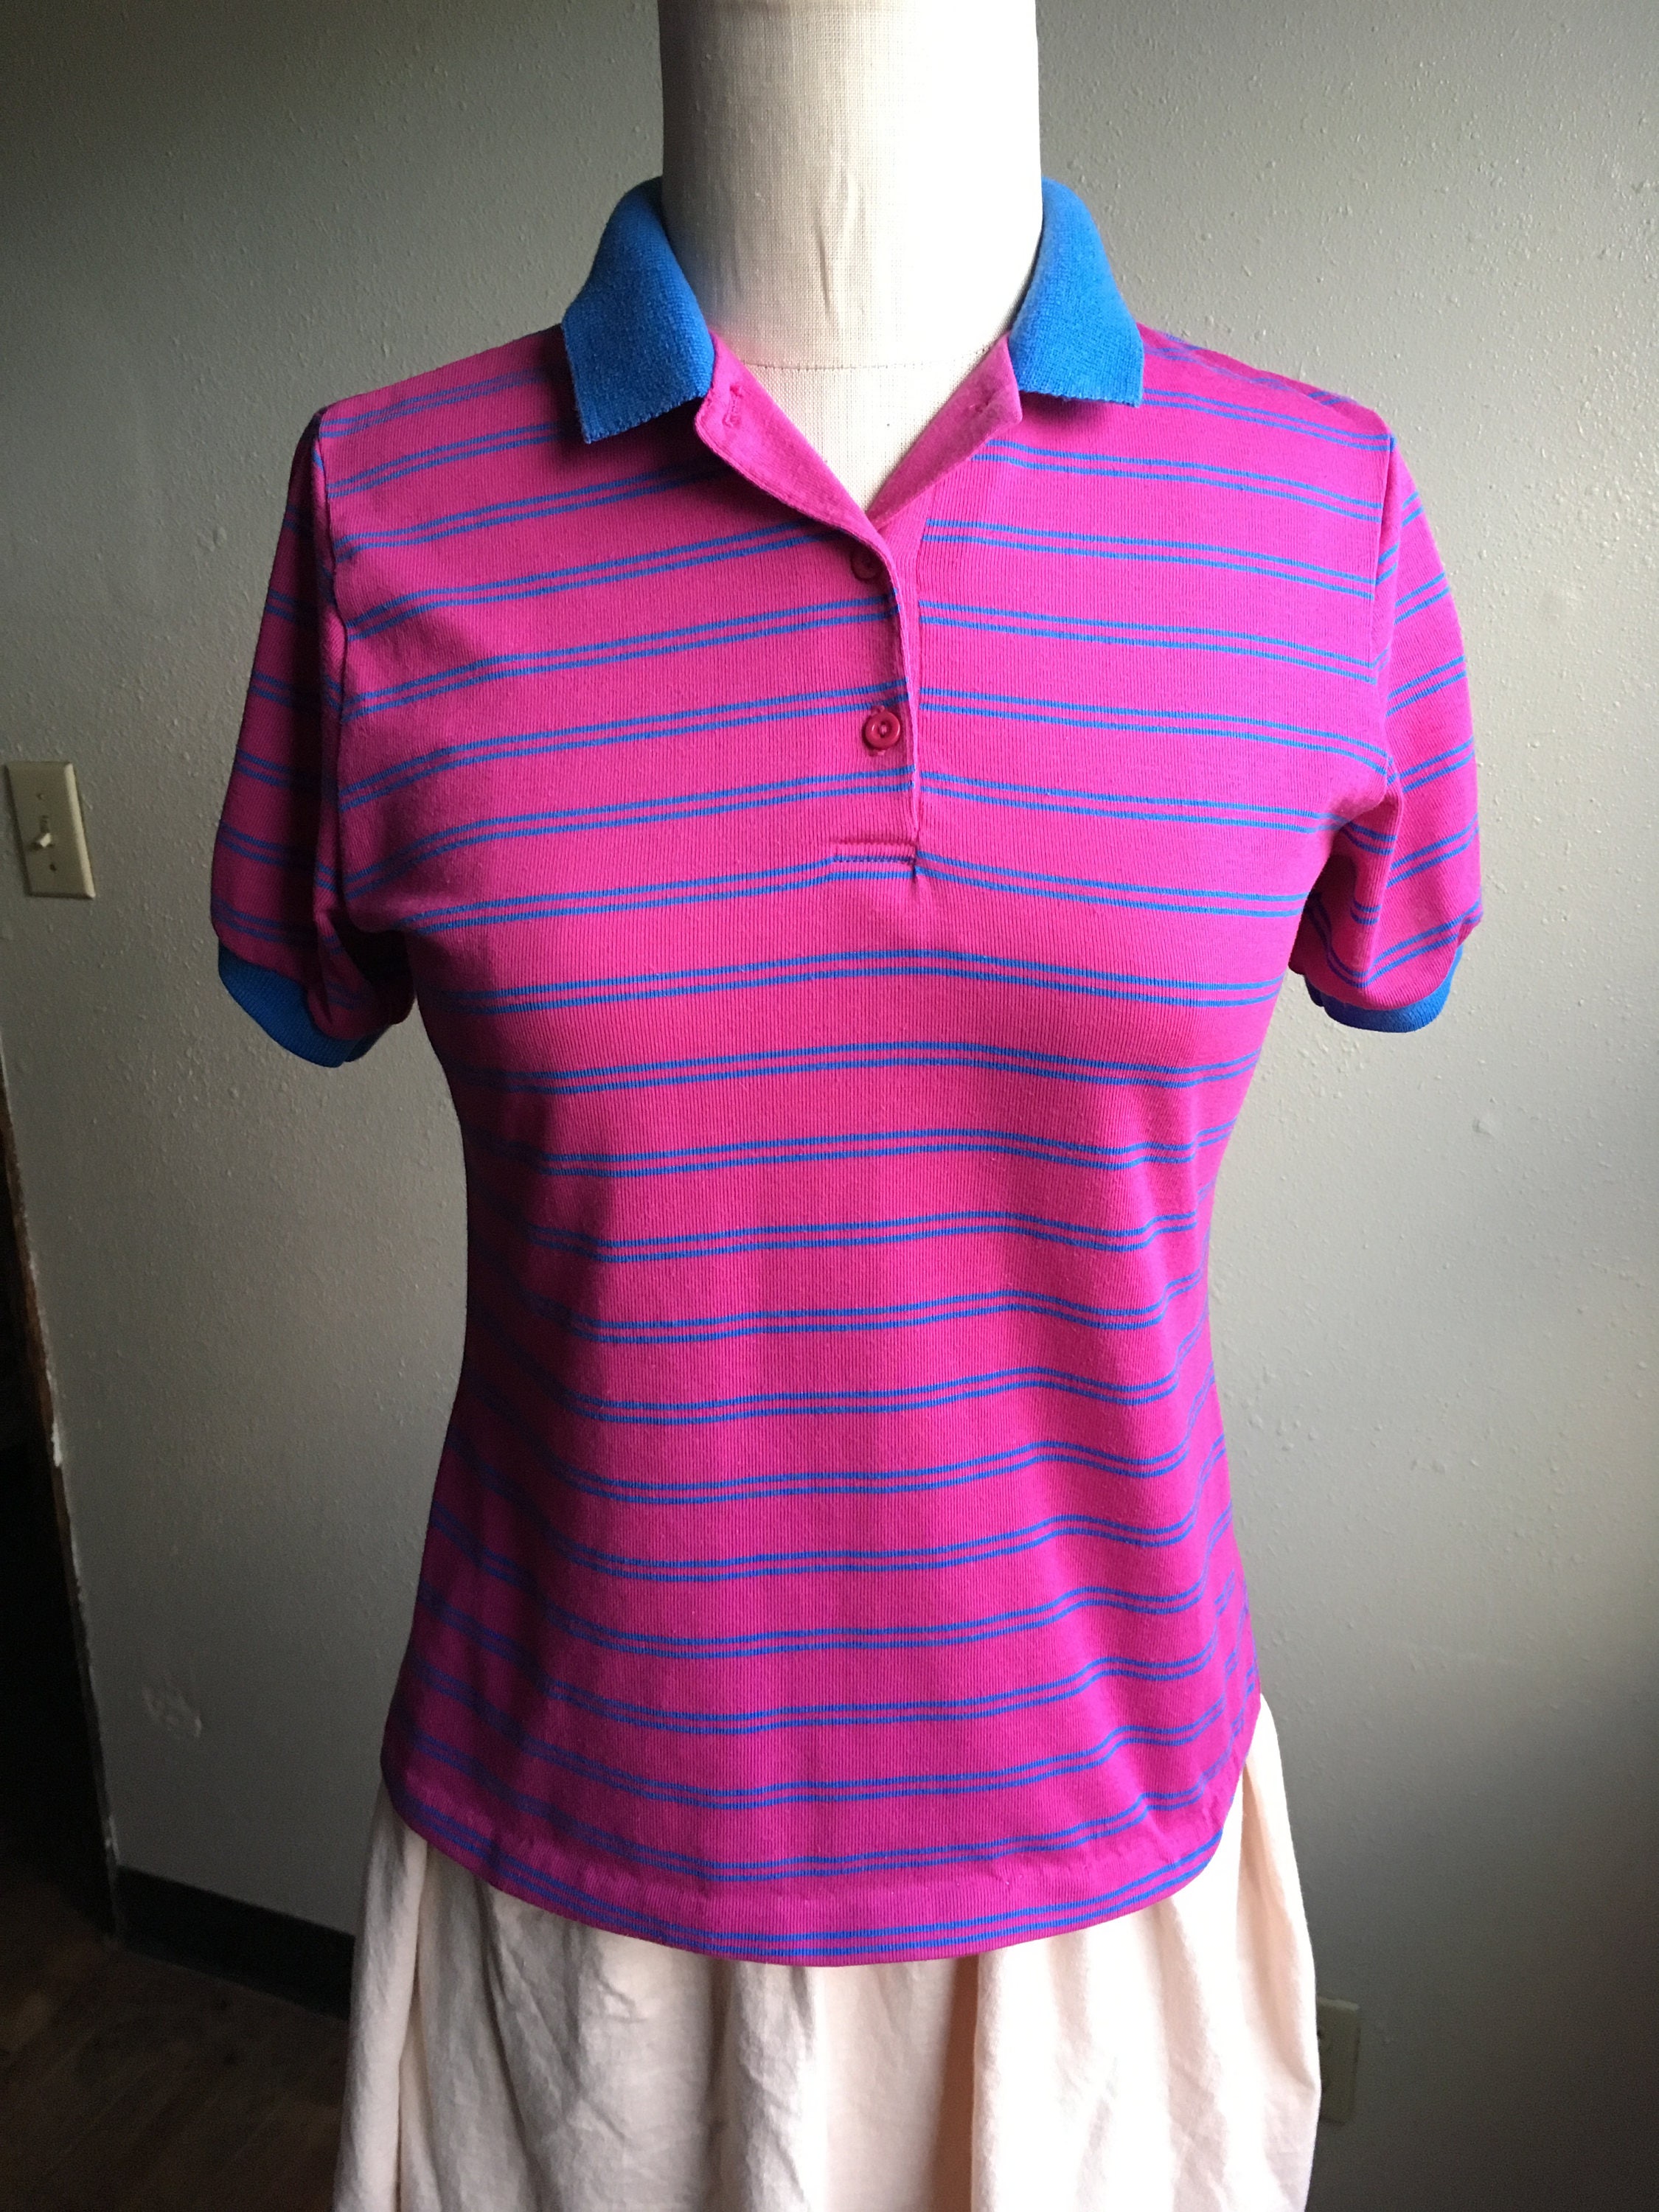 Vintage 80s OP Ocean Pacific Striped Short Sleeve Polo Shirt | Etsy